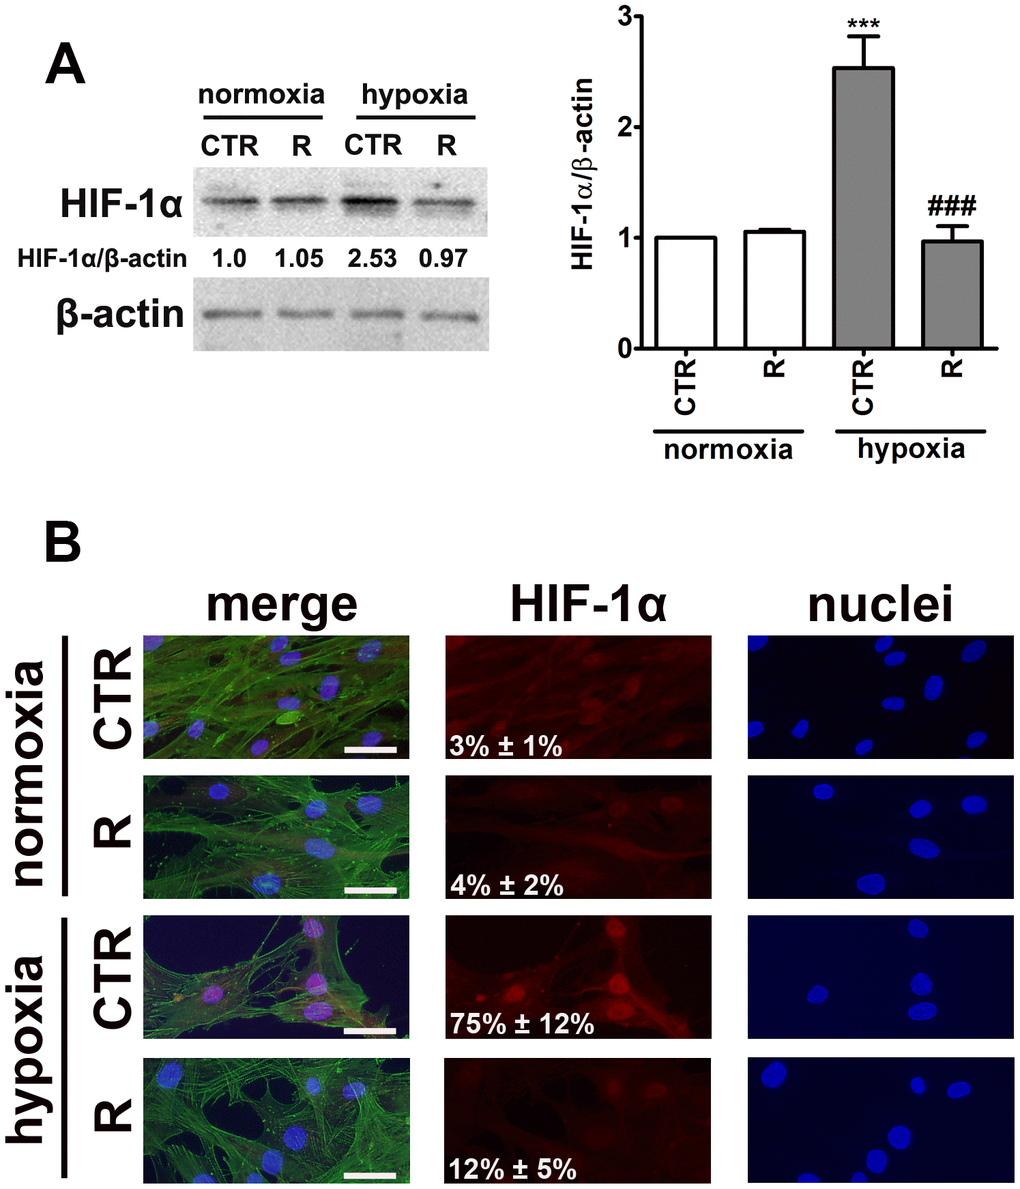 HIF-1α upregulation (A) and nuclear translocation (B) upon stimulation with hypoxia-mimetic agent cobalt chloride and the effect of remifentanil preconditioning in HCM cells. (A) Western blot analysis of the levels of HIF-1α. Data were normalized to β-actin. (B) Immunofluorescence analysis of cellular localization of HIF-1α (red). Representative microphotographs are shown, objective 10×, scale bars 10 μm. F-actin staining (green) and nucleus staining (blue) were also considered. Nuclear immuno-signals of HIF-1α were calculated [%]. Bars indicate SD, n = 3, ***p ###p a posteriori test). CTR, control; R, remifentanil preconditioning.